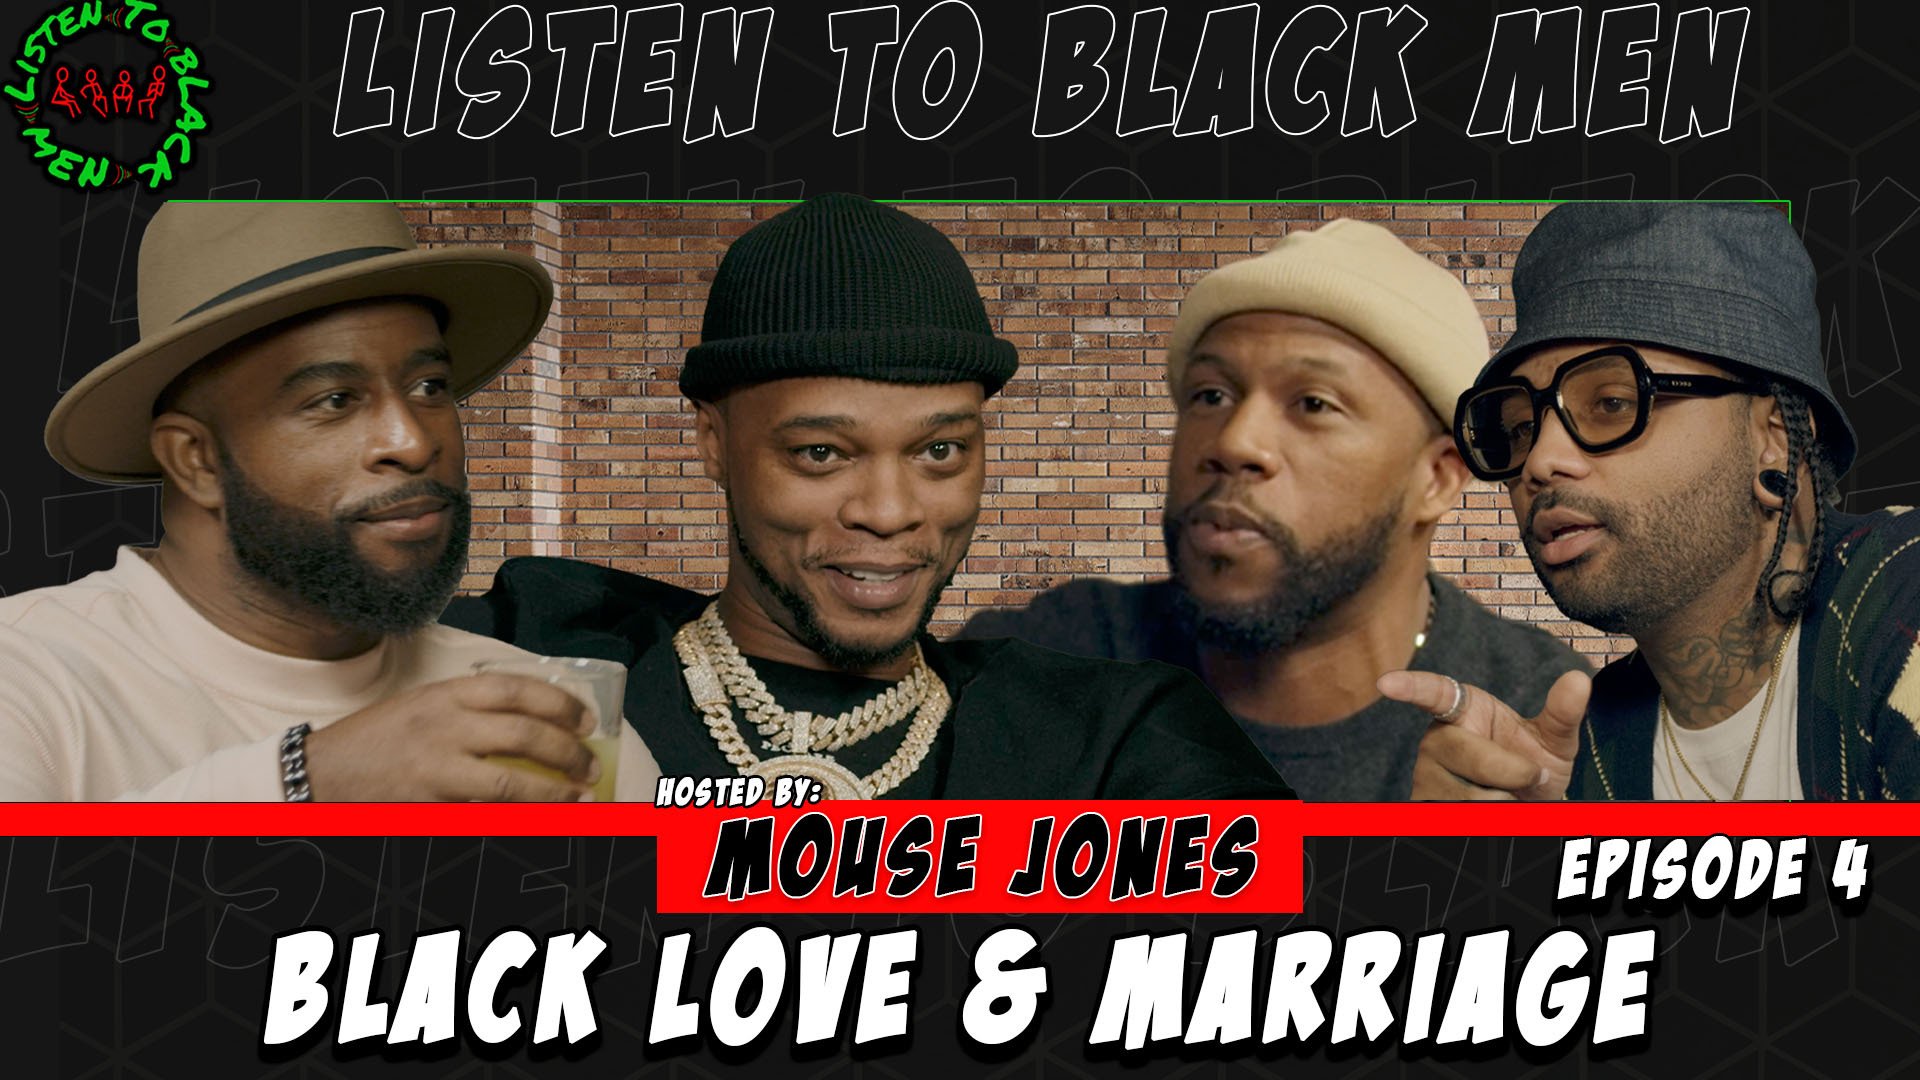 Listen to Black Men: Episode 4 - Black Love and Marriage (Featuring Papoose, Mouse Jones, Jeremie Rivers, Tyler Chronicles)